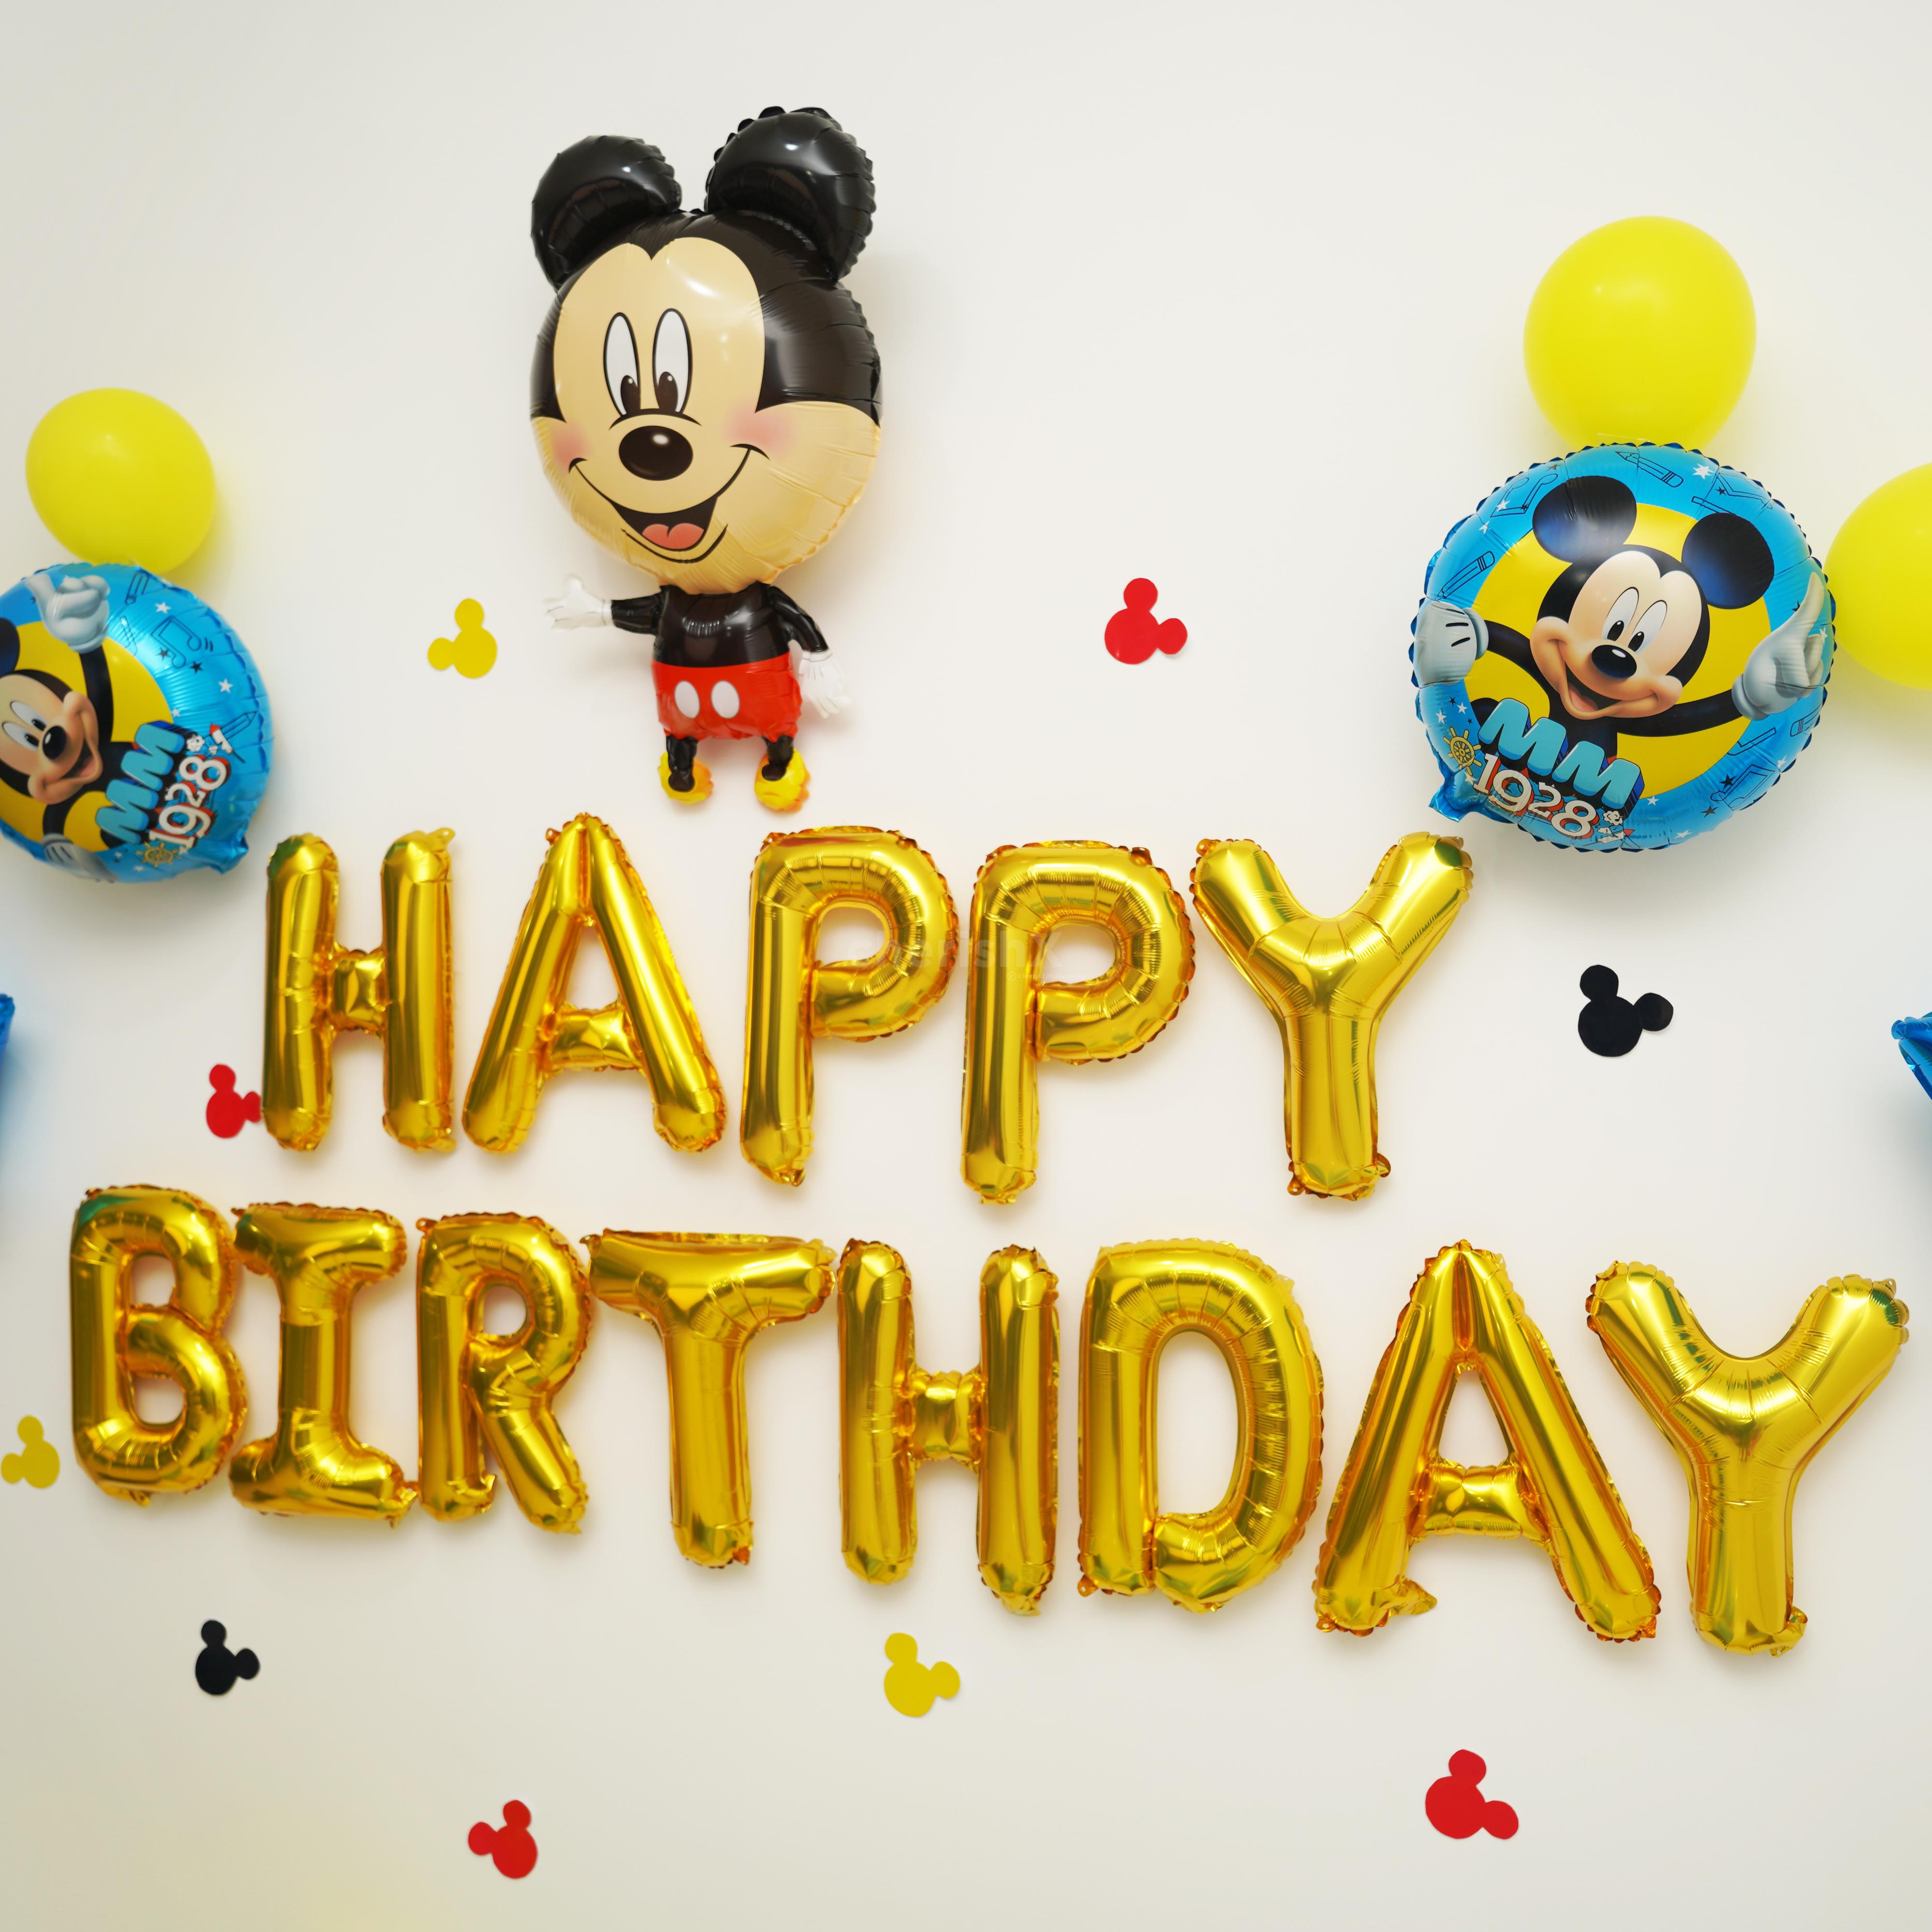 1st or 5th birthday, Celebrate your kid's birthday with  Mickey Mouse Birthday Party Decoration!